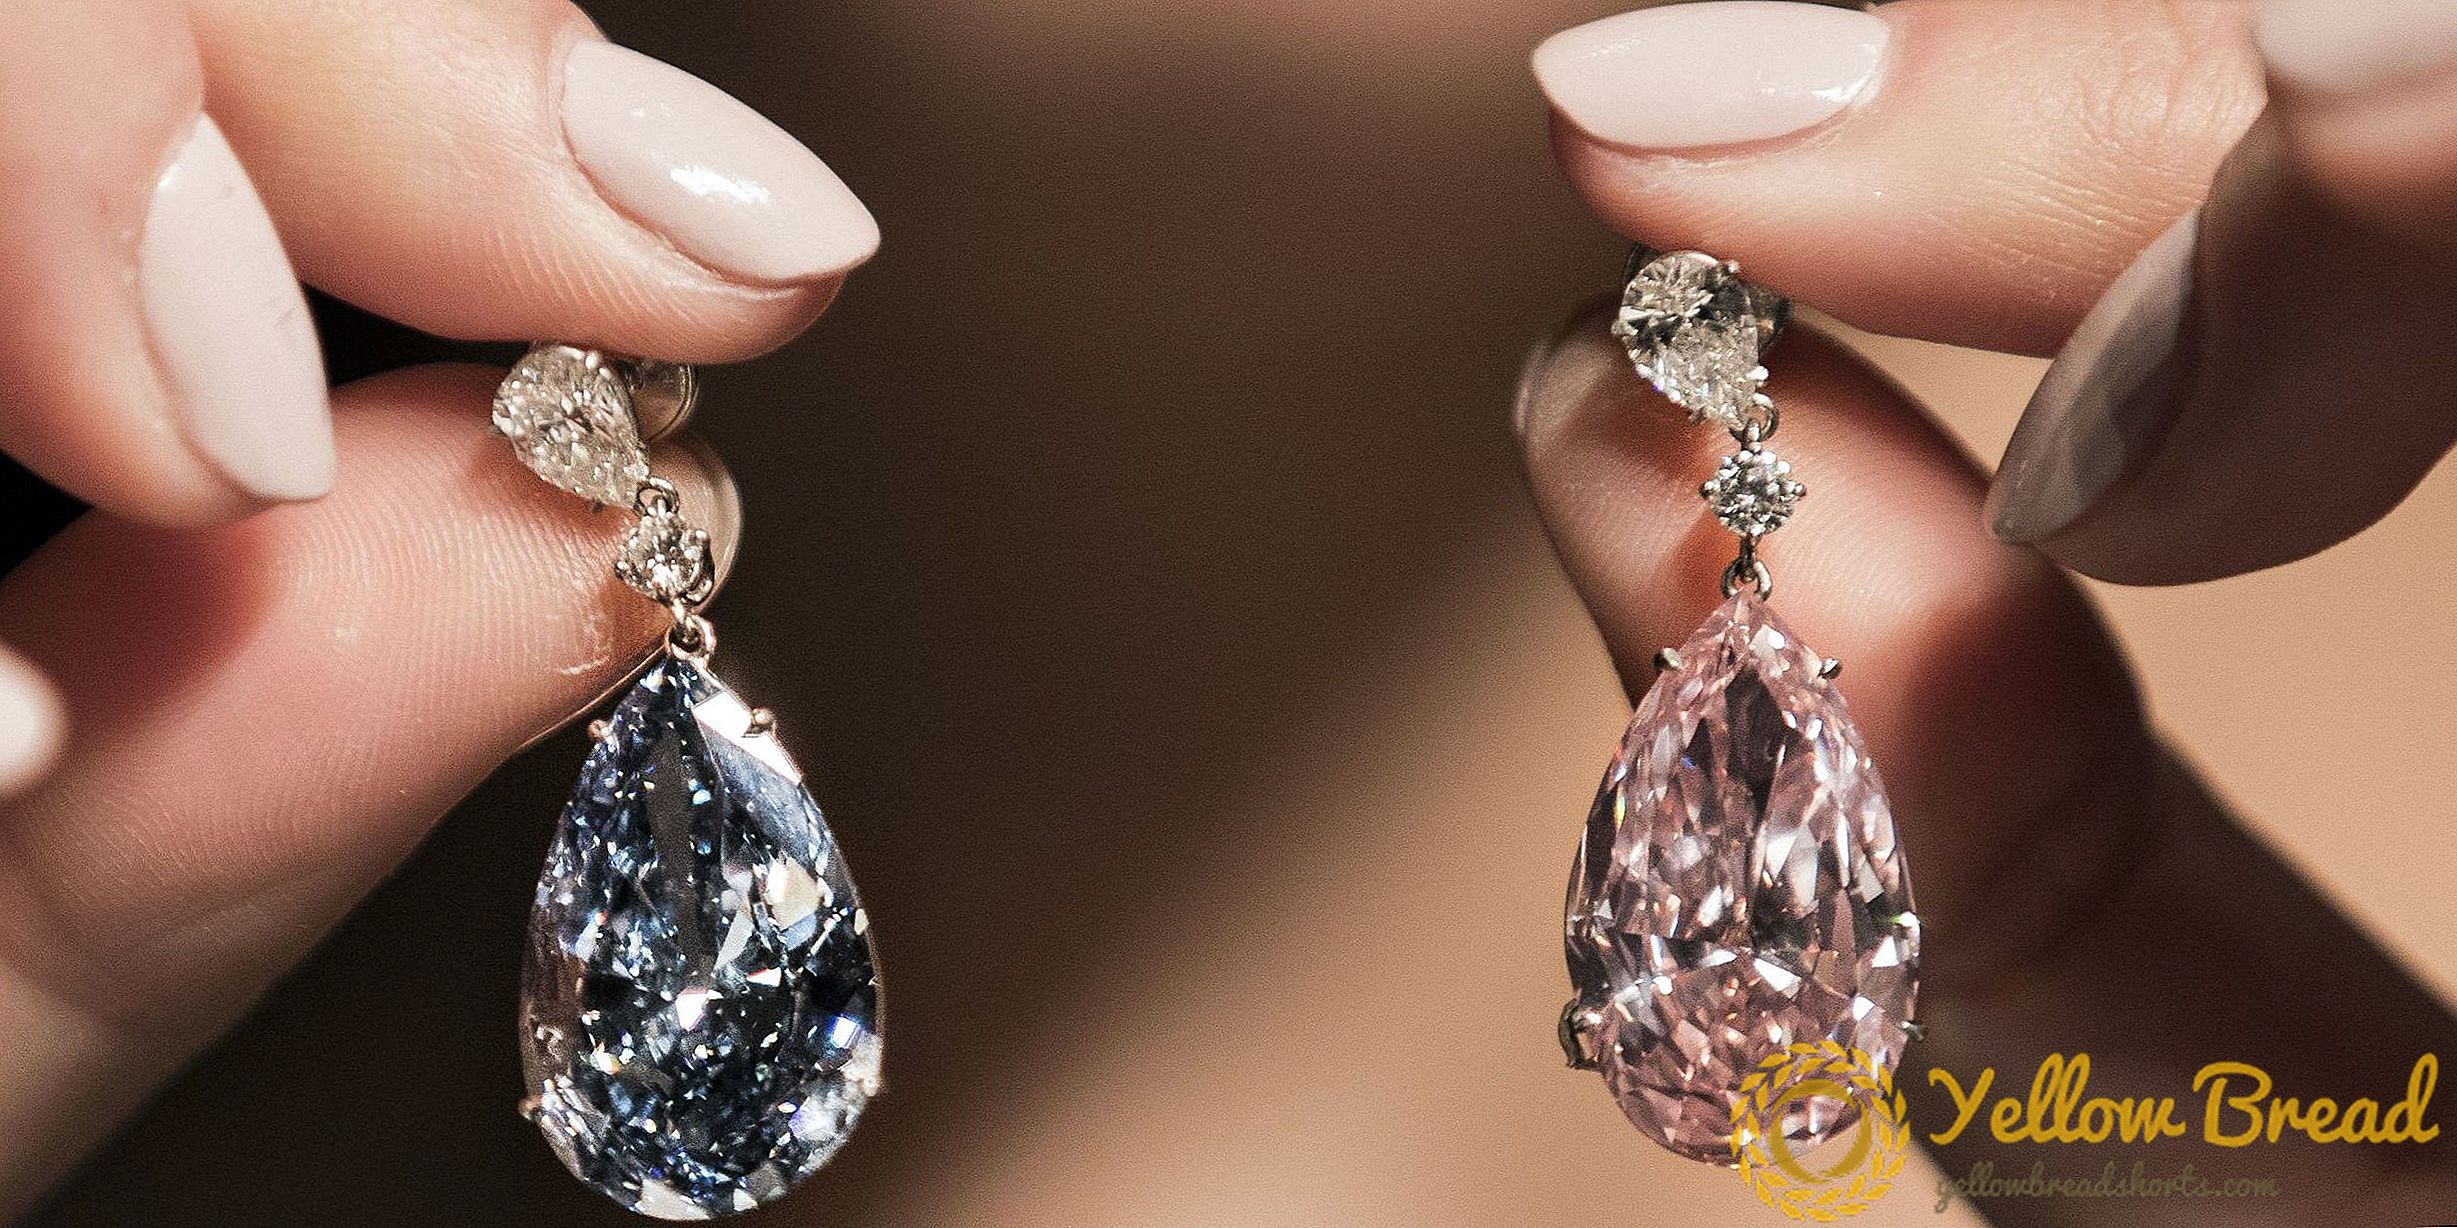 Sotheby's Sold The Most Expensive Earrings Ever Up For Auction